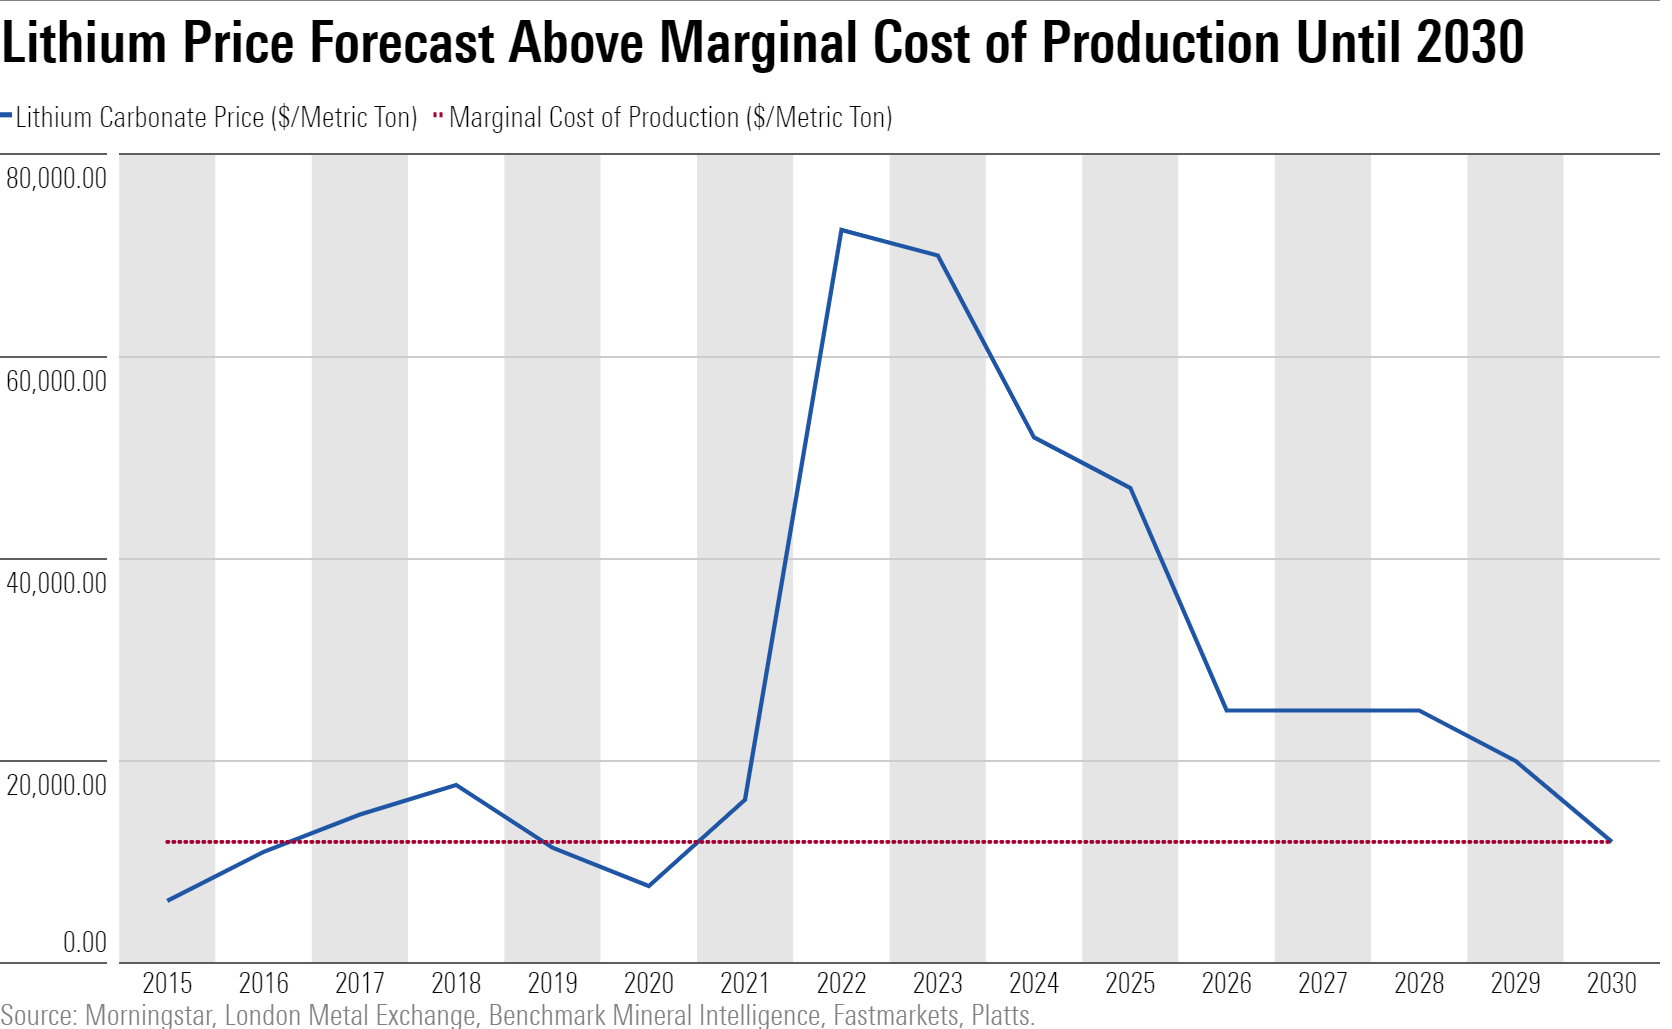 We expect lithium prices to remain above the marginal cost of production throughout this decade.